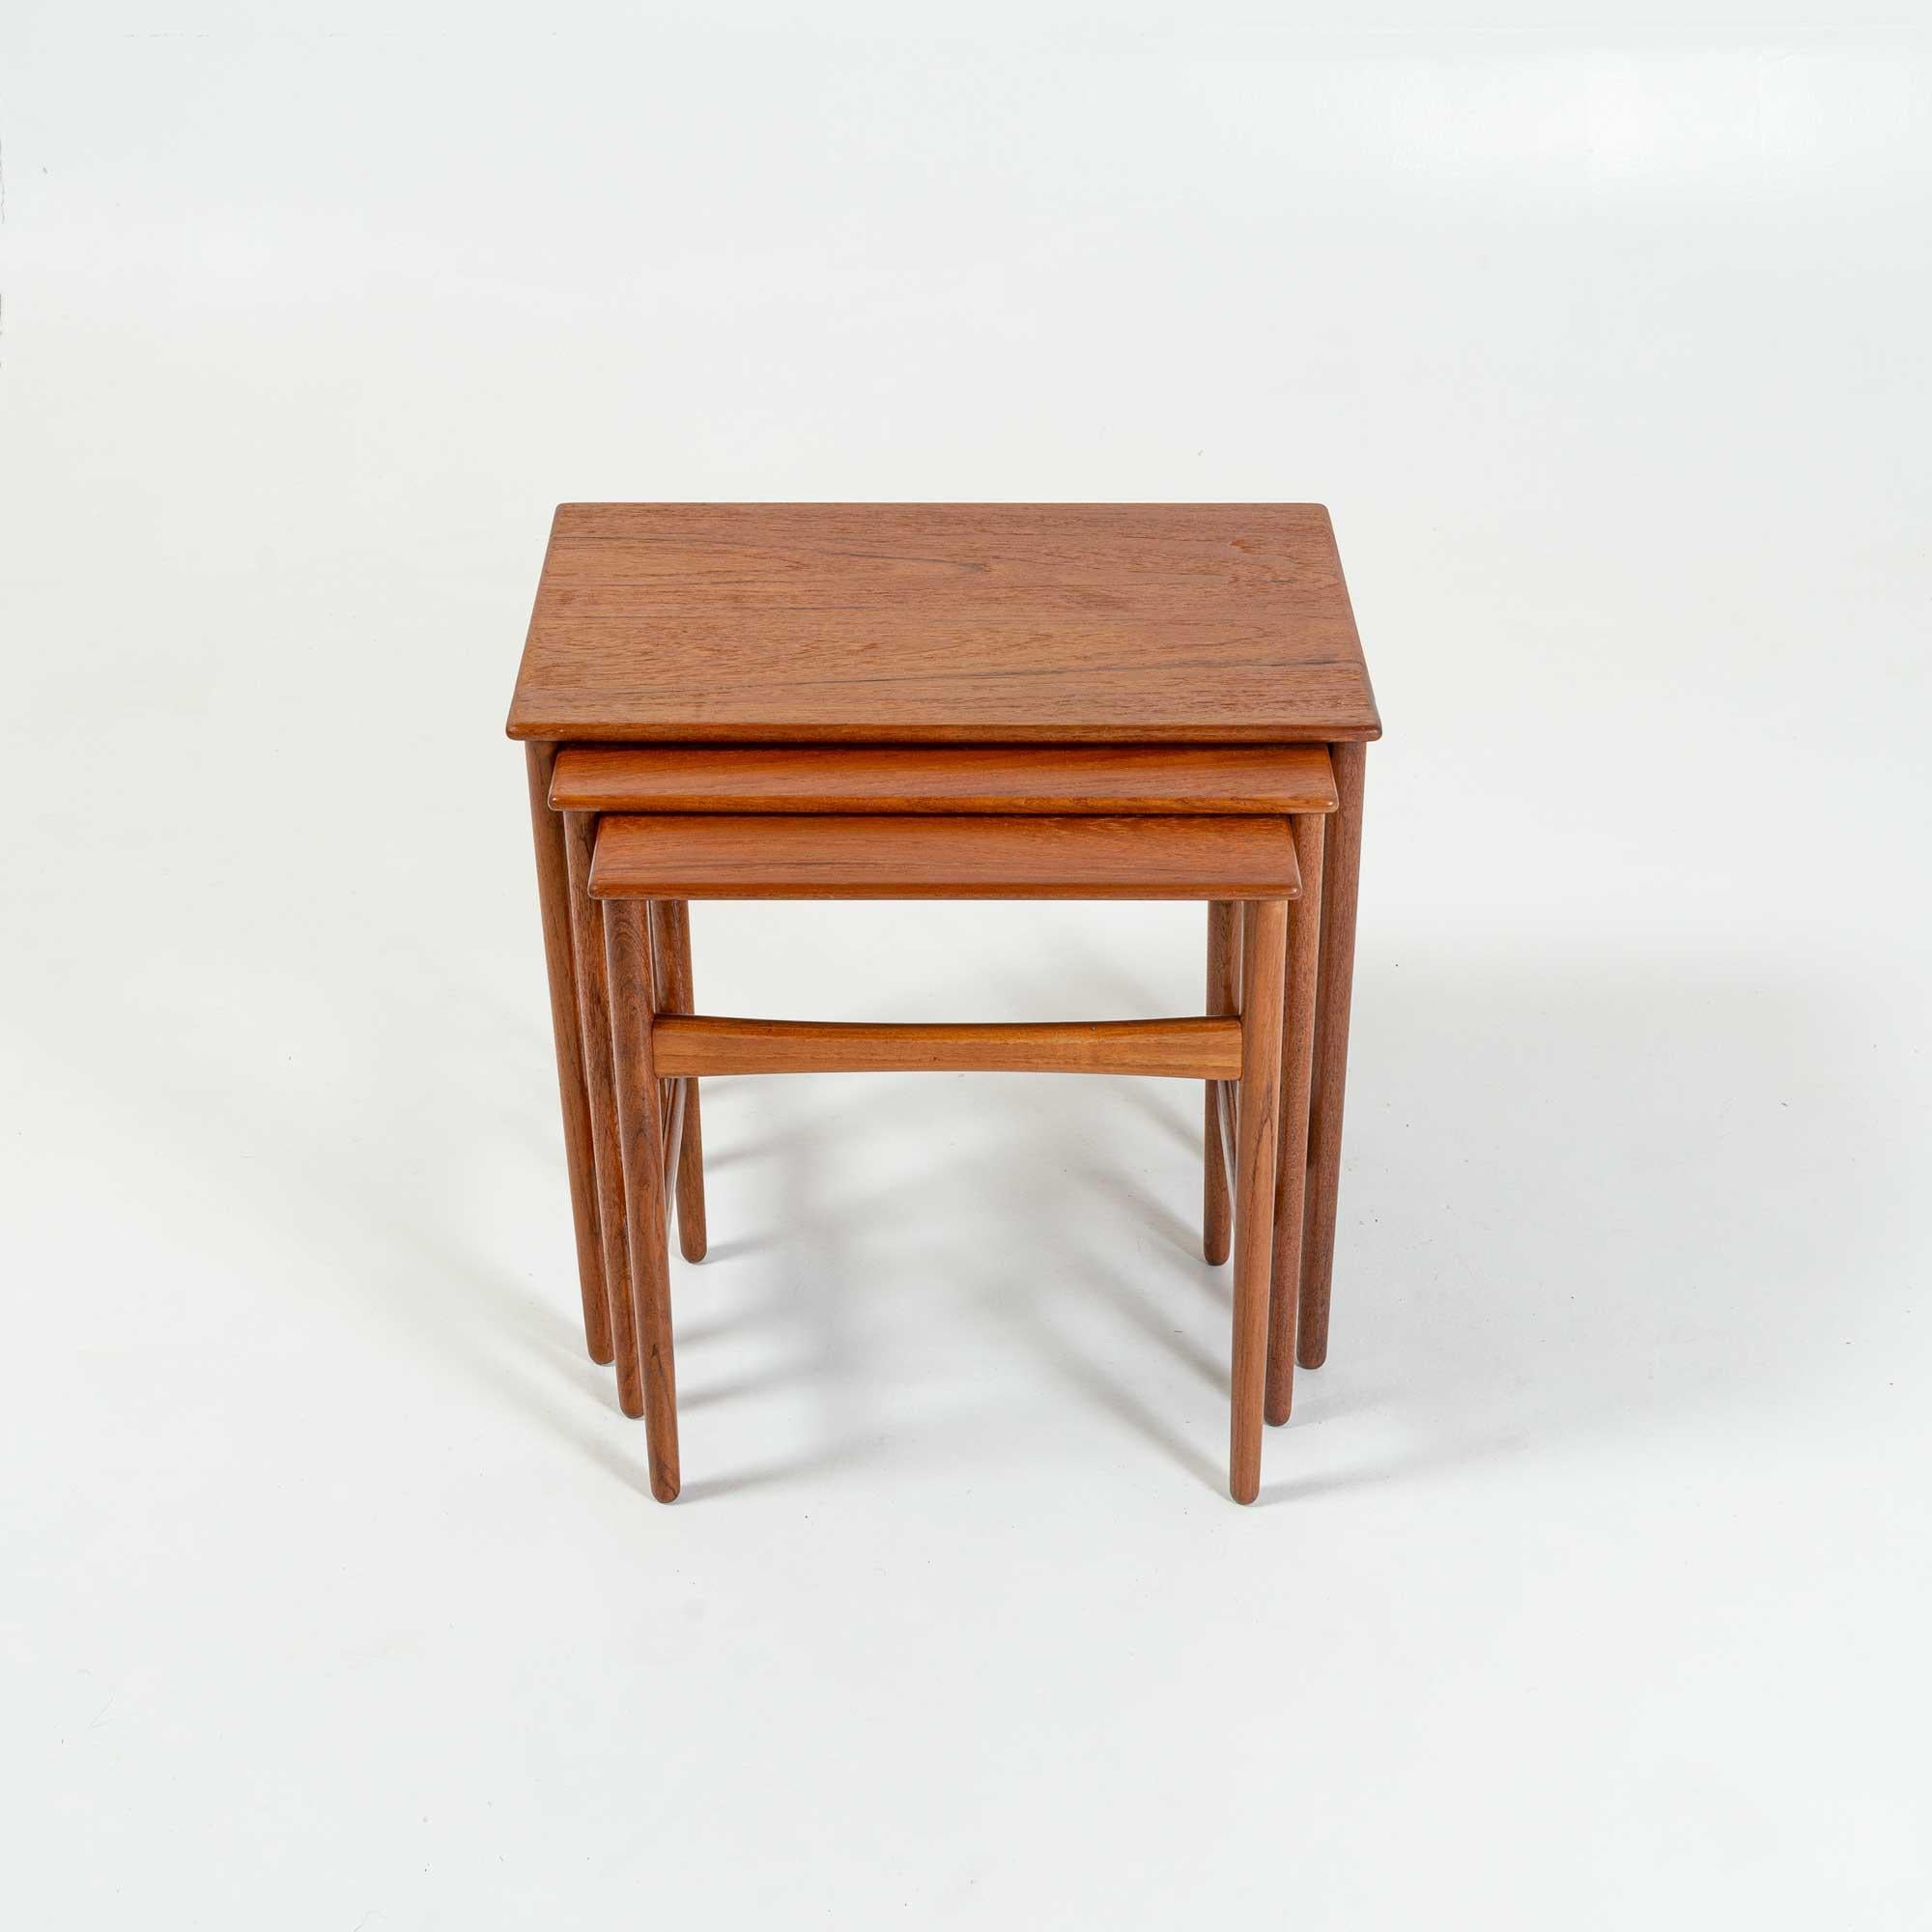 A Mid-Century Modern Classic nesting set of side Table, designed by Hans Wegner, manufactured by Andreas Tuck, Teak, 1960s. In overall good condition, has been restored ready to use.